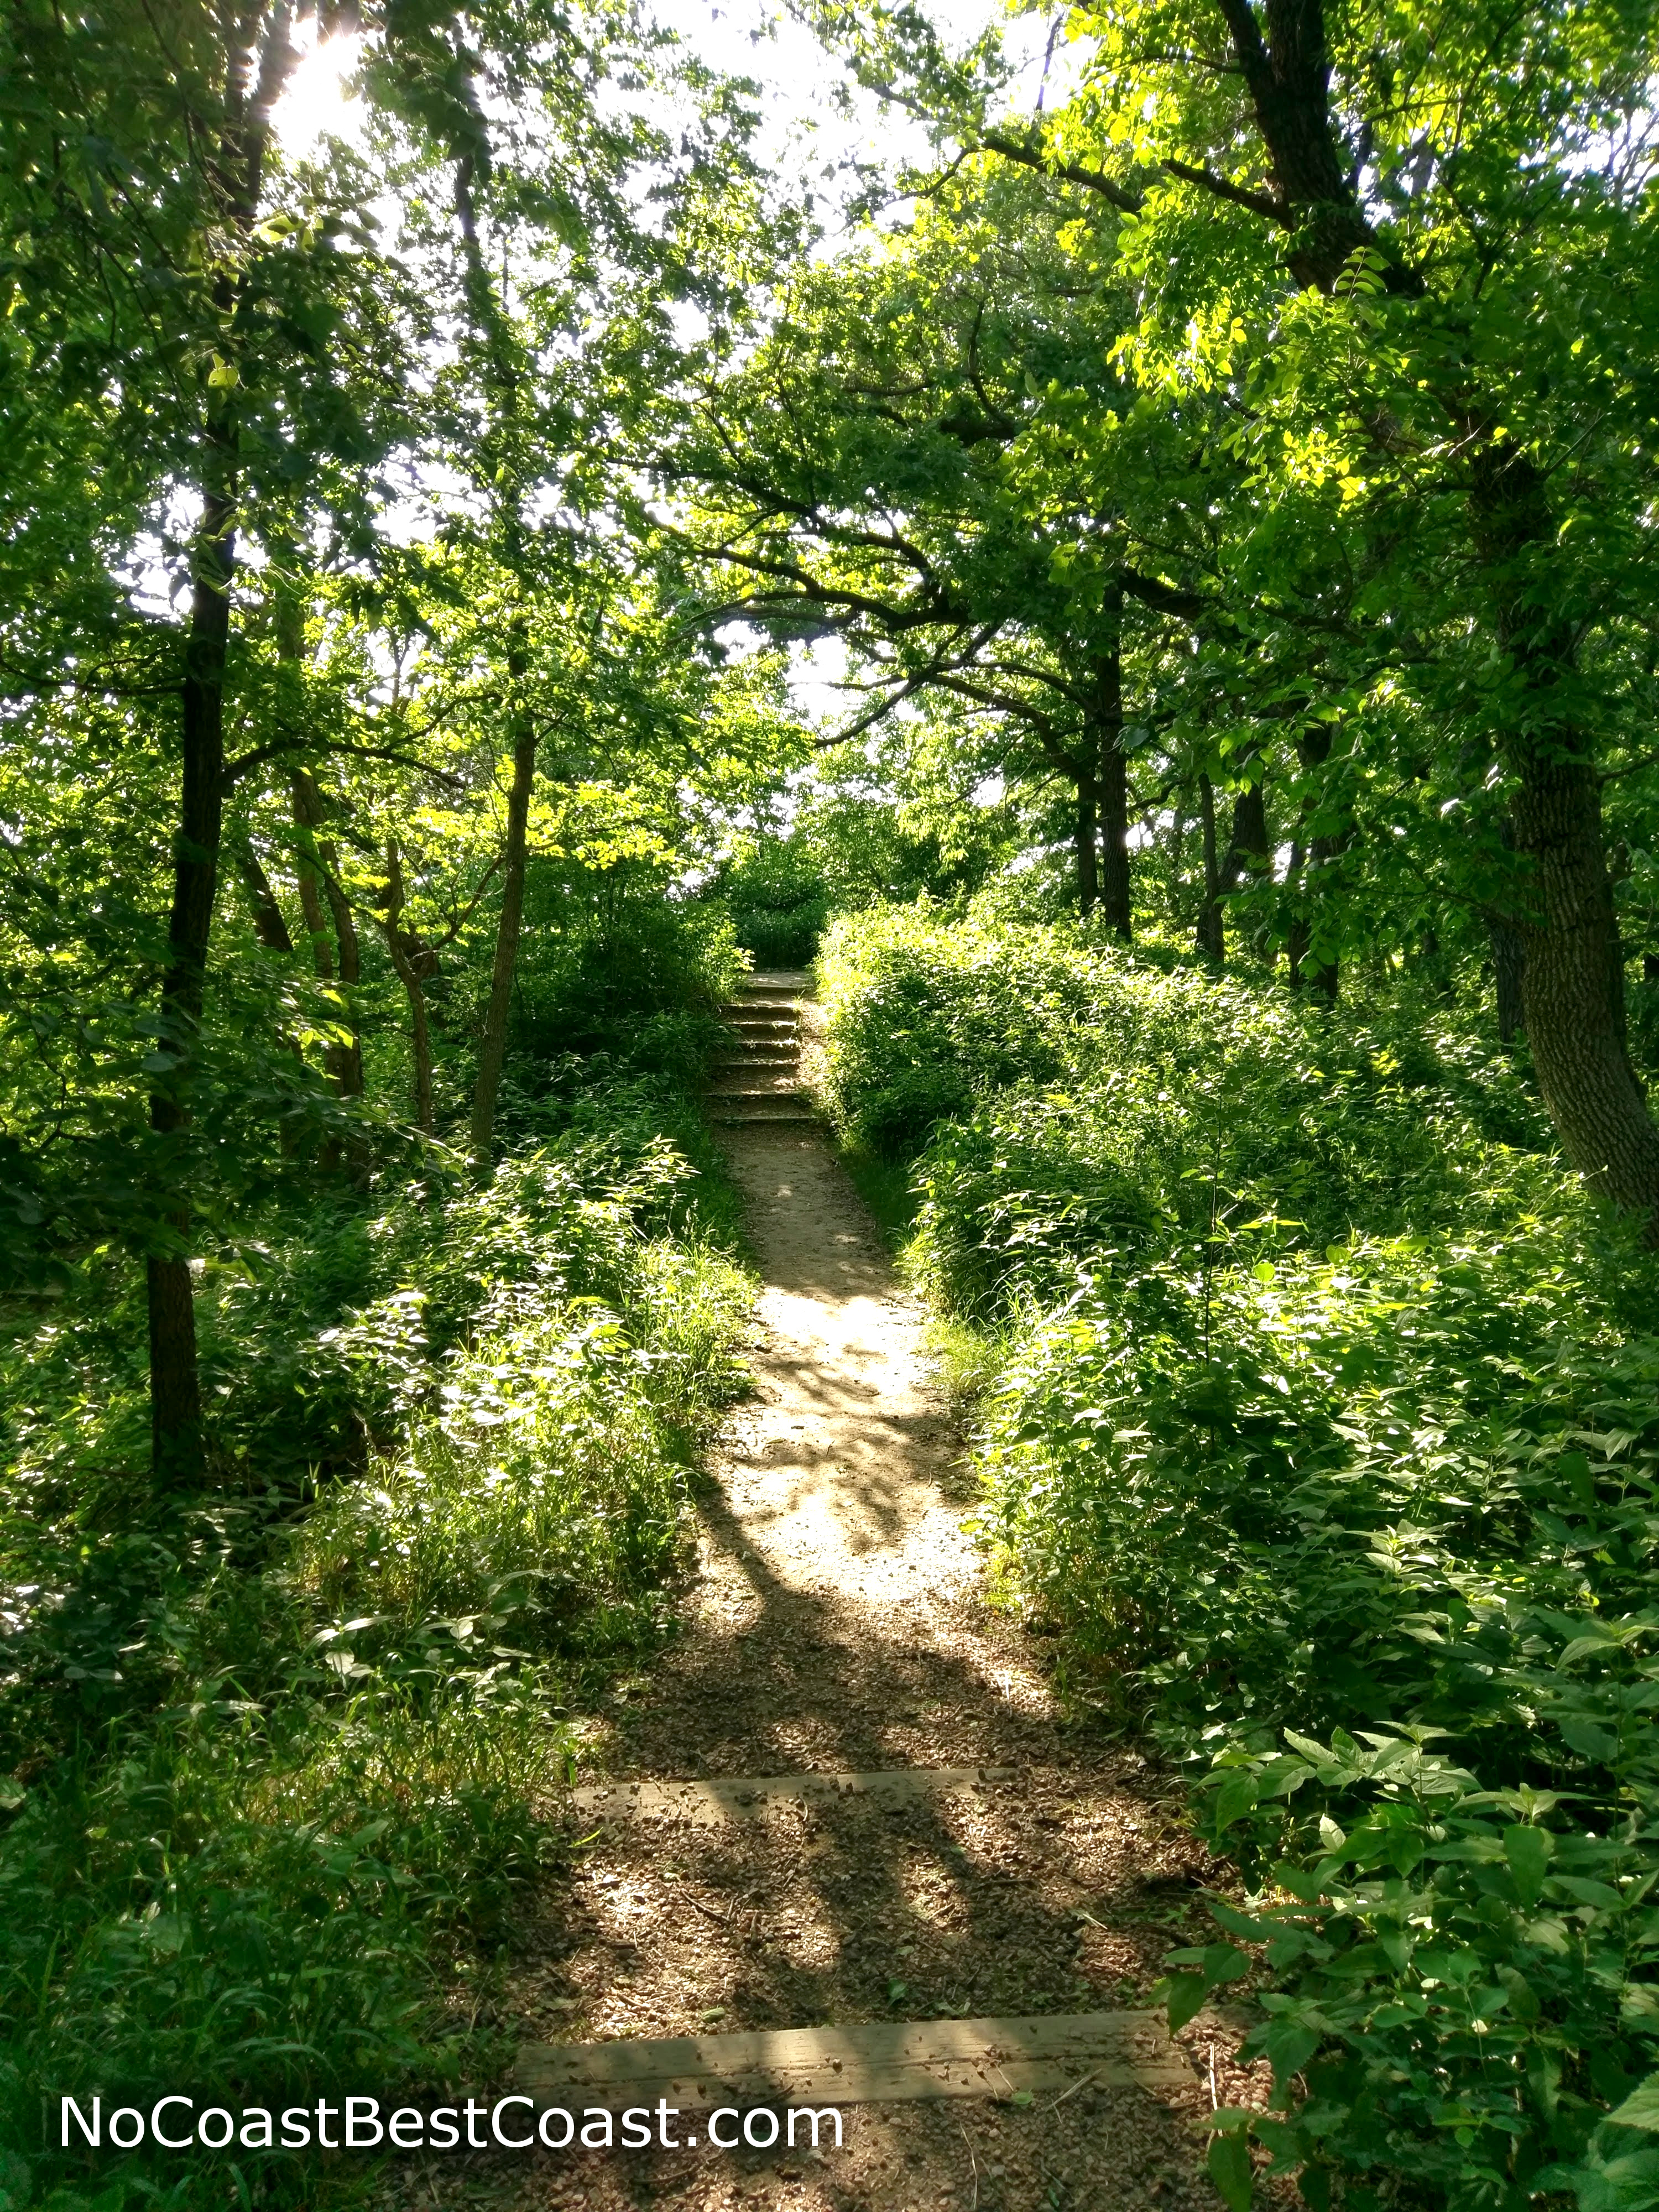 The shady trail with steps in the distance